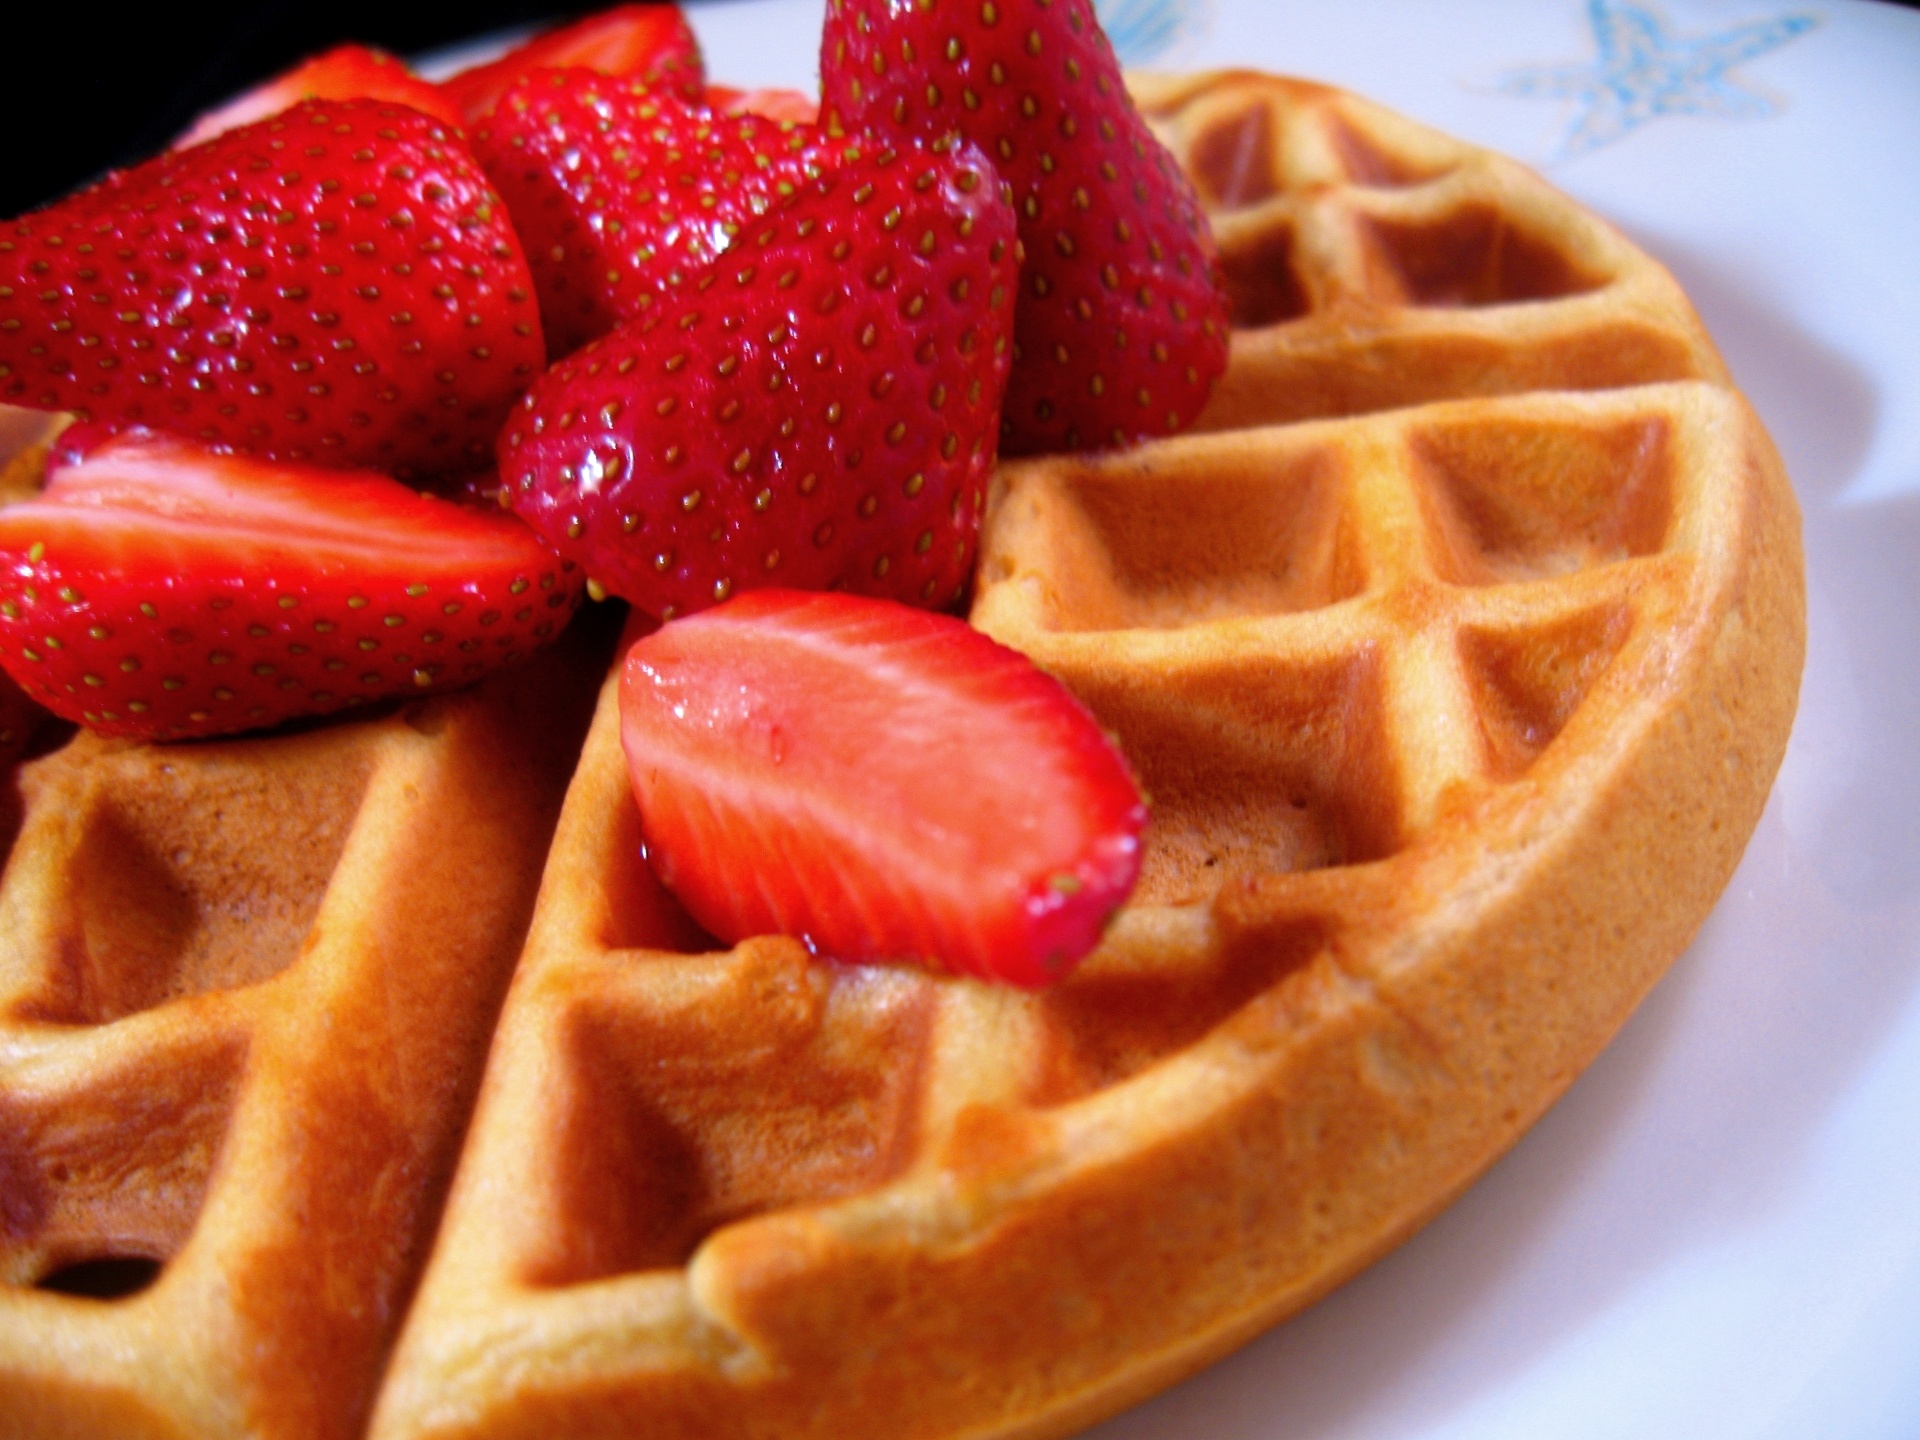 Waffle: Square cake made of batter with squares marked on it. 1920x1440 HD Wallpaper.